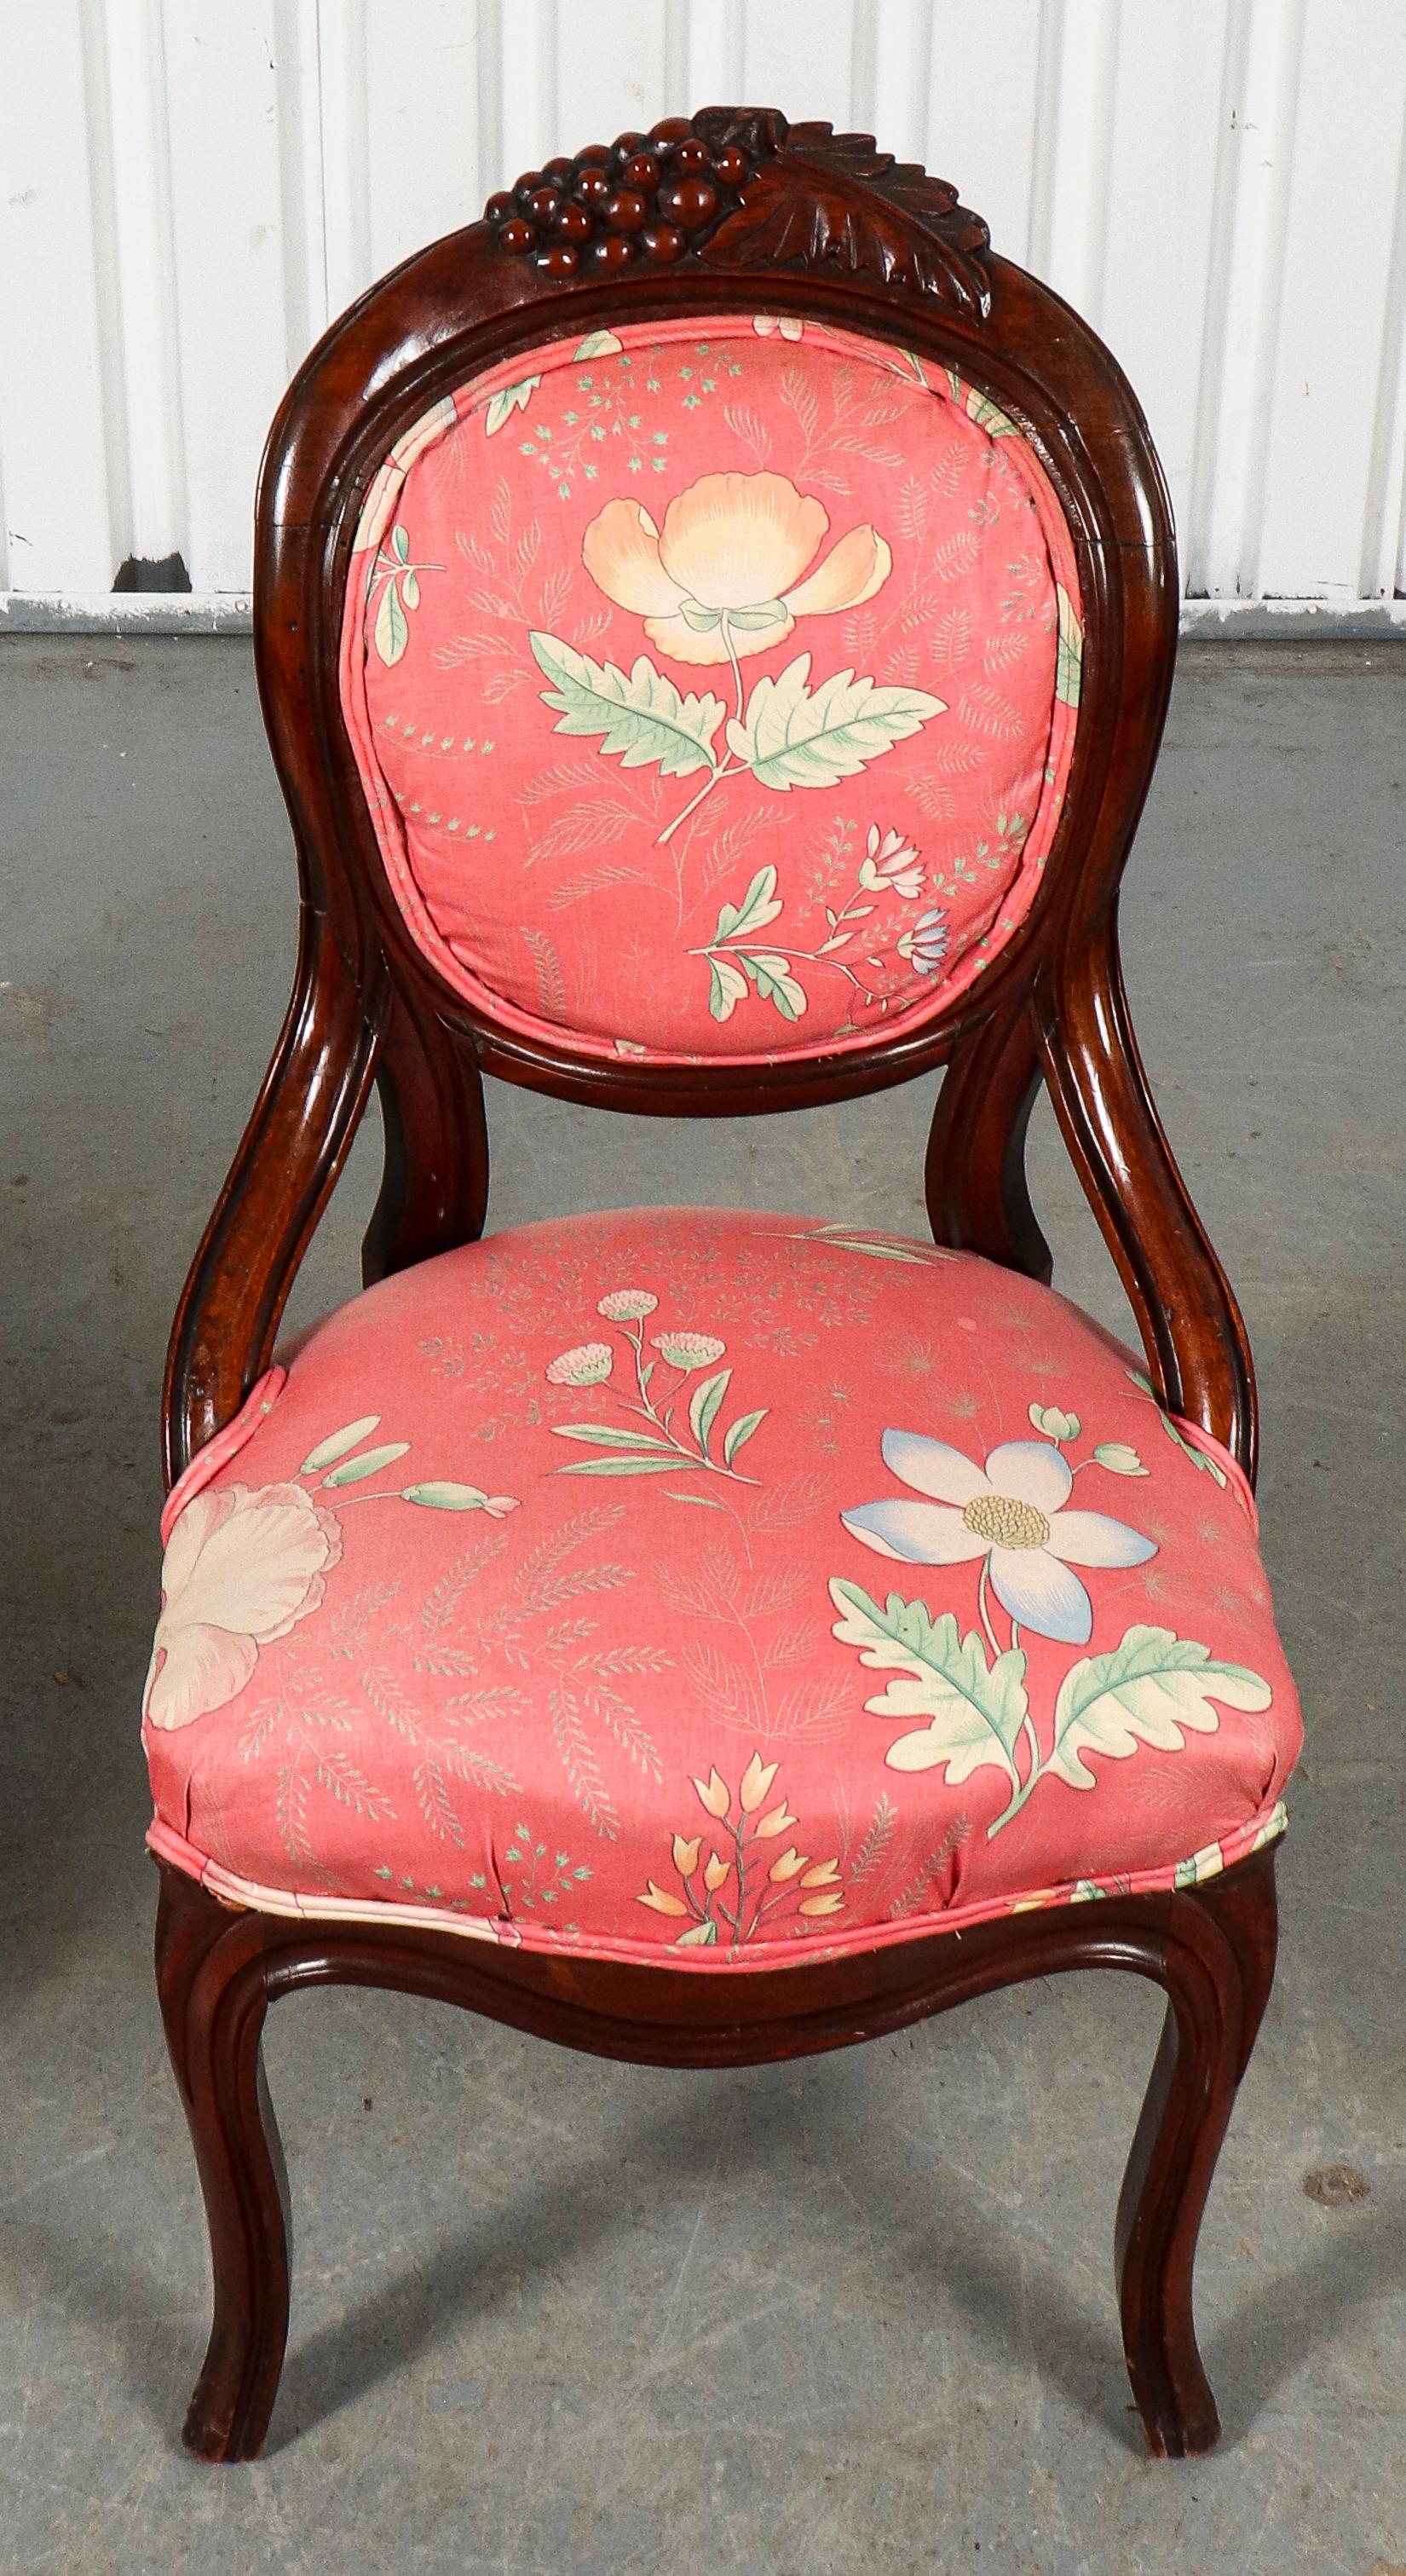 American Rococo Revival Style Wooden Chairs For Sale 2